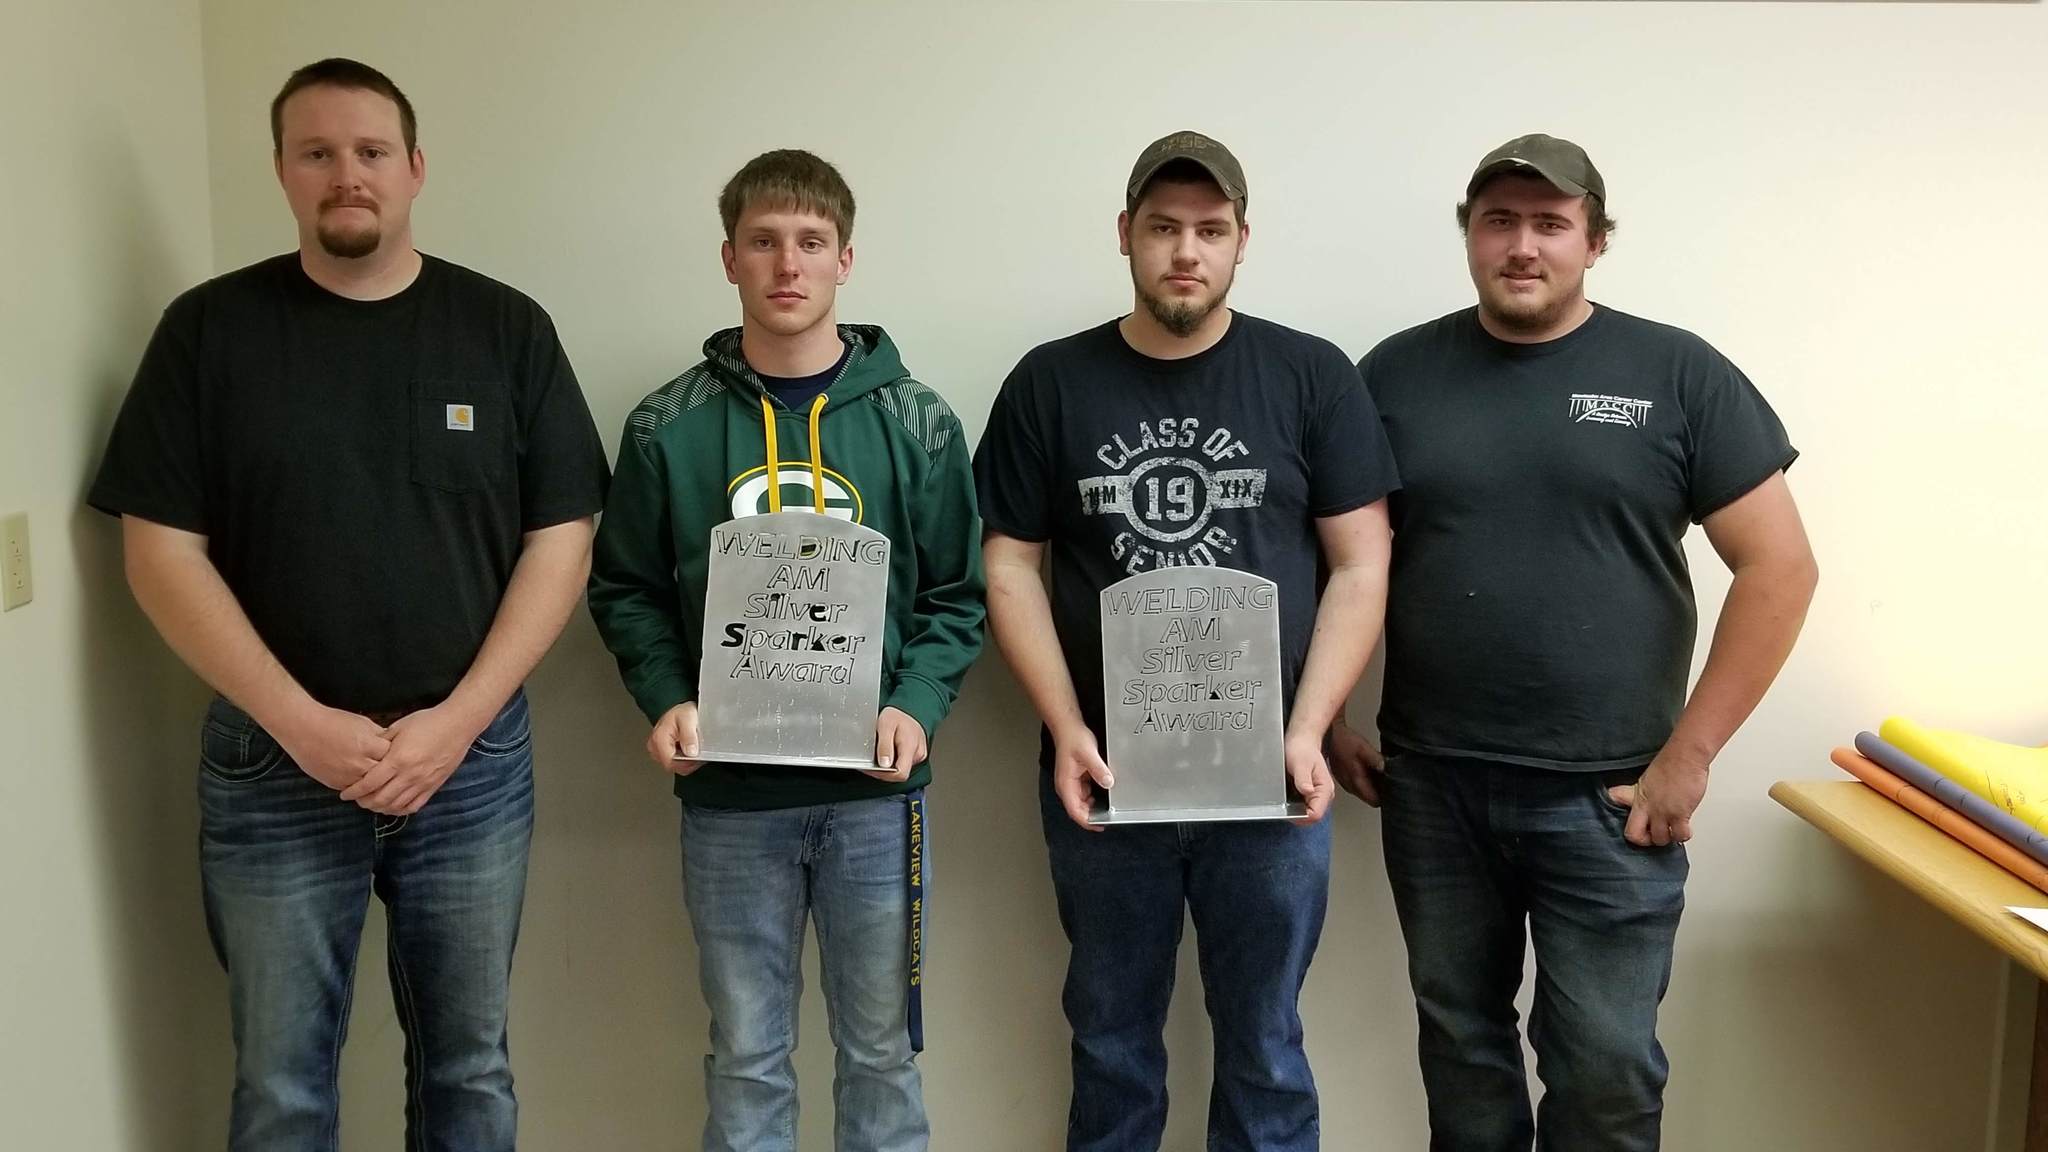 Mr. Deal, Mr. Daggett, and students that earned special honors in welding.